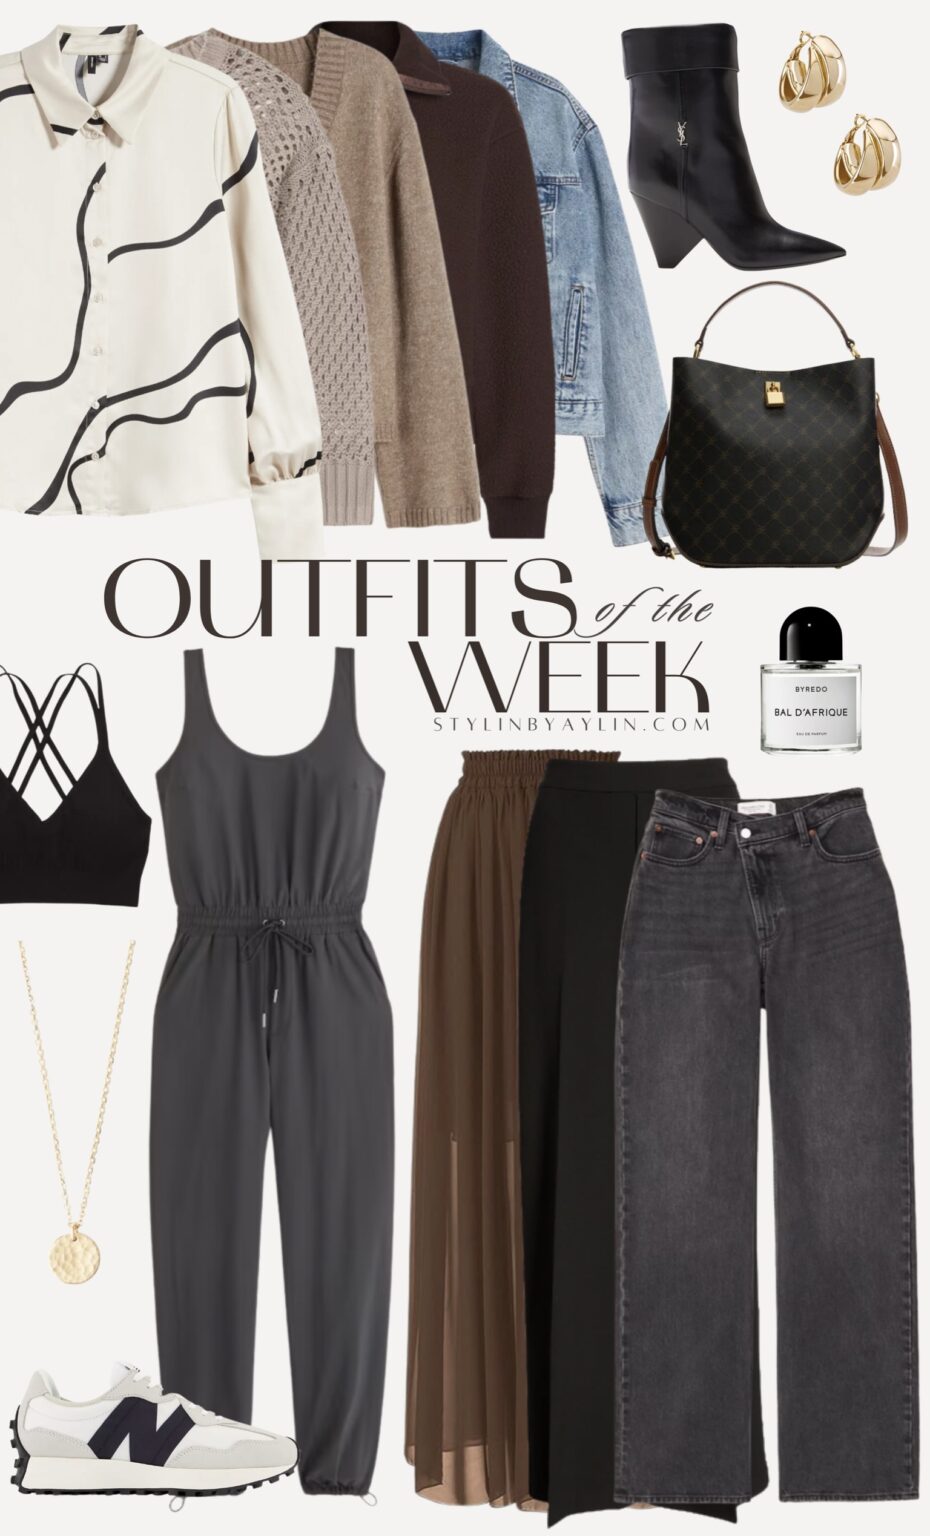 OUTFITS OF THE WEEK 9/24 - Stylin by Aylin